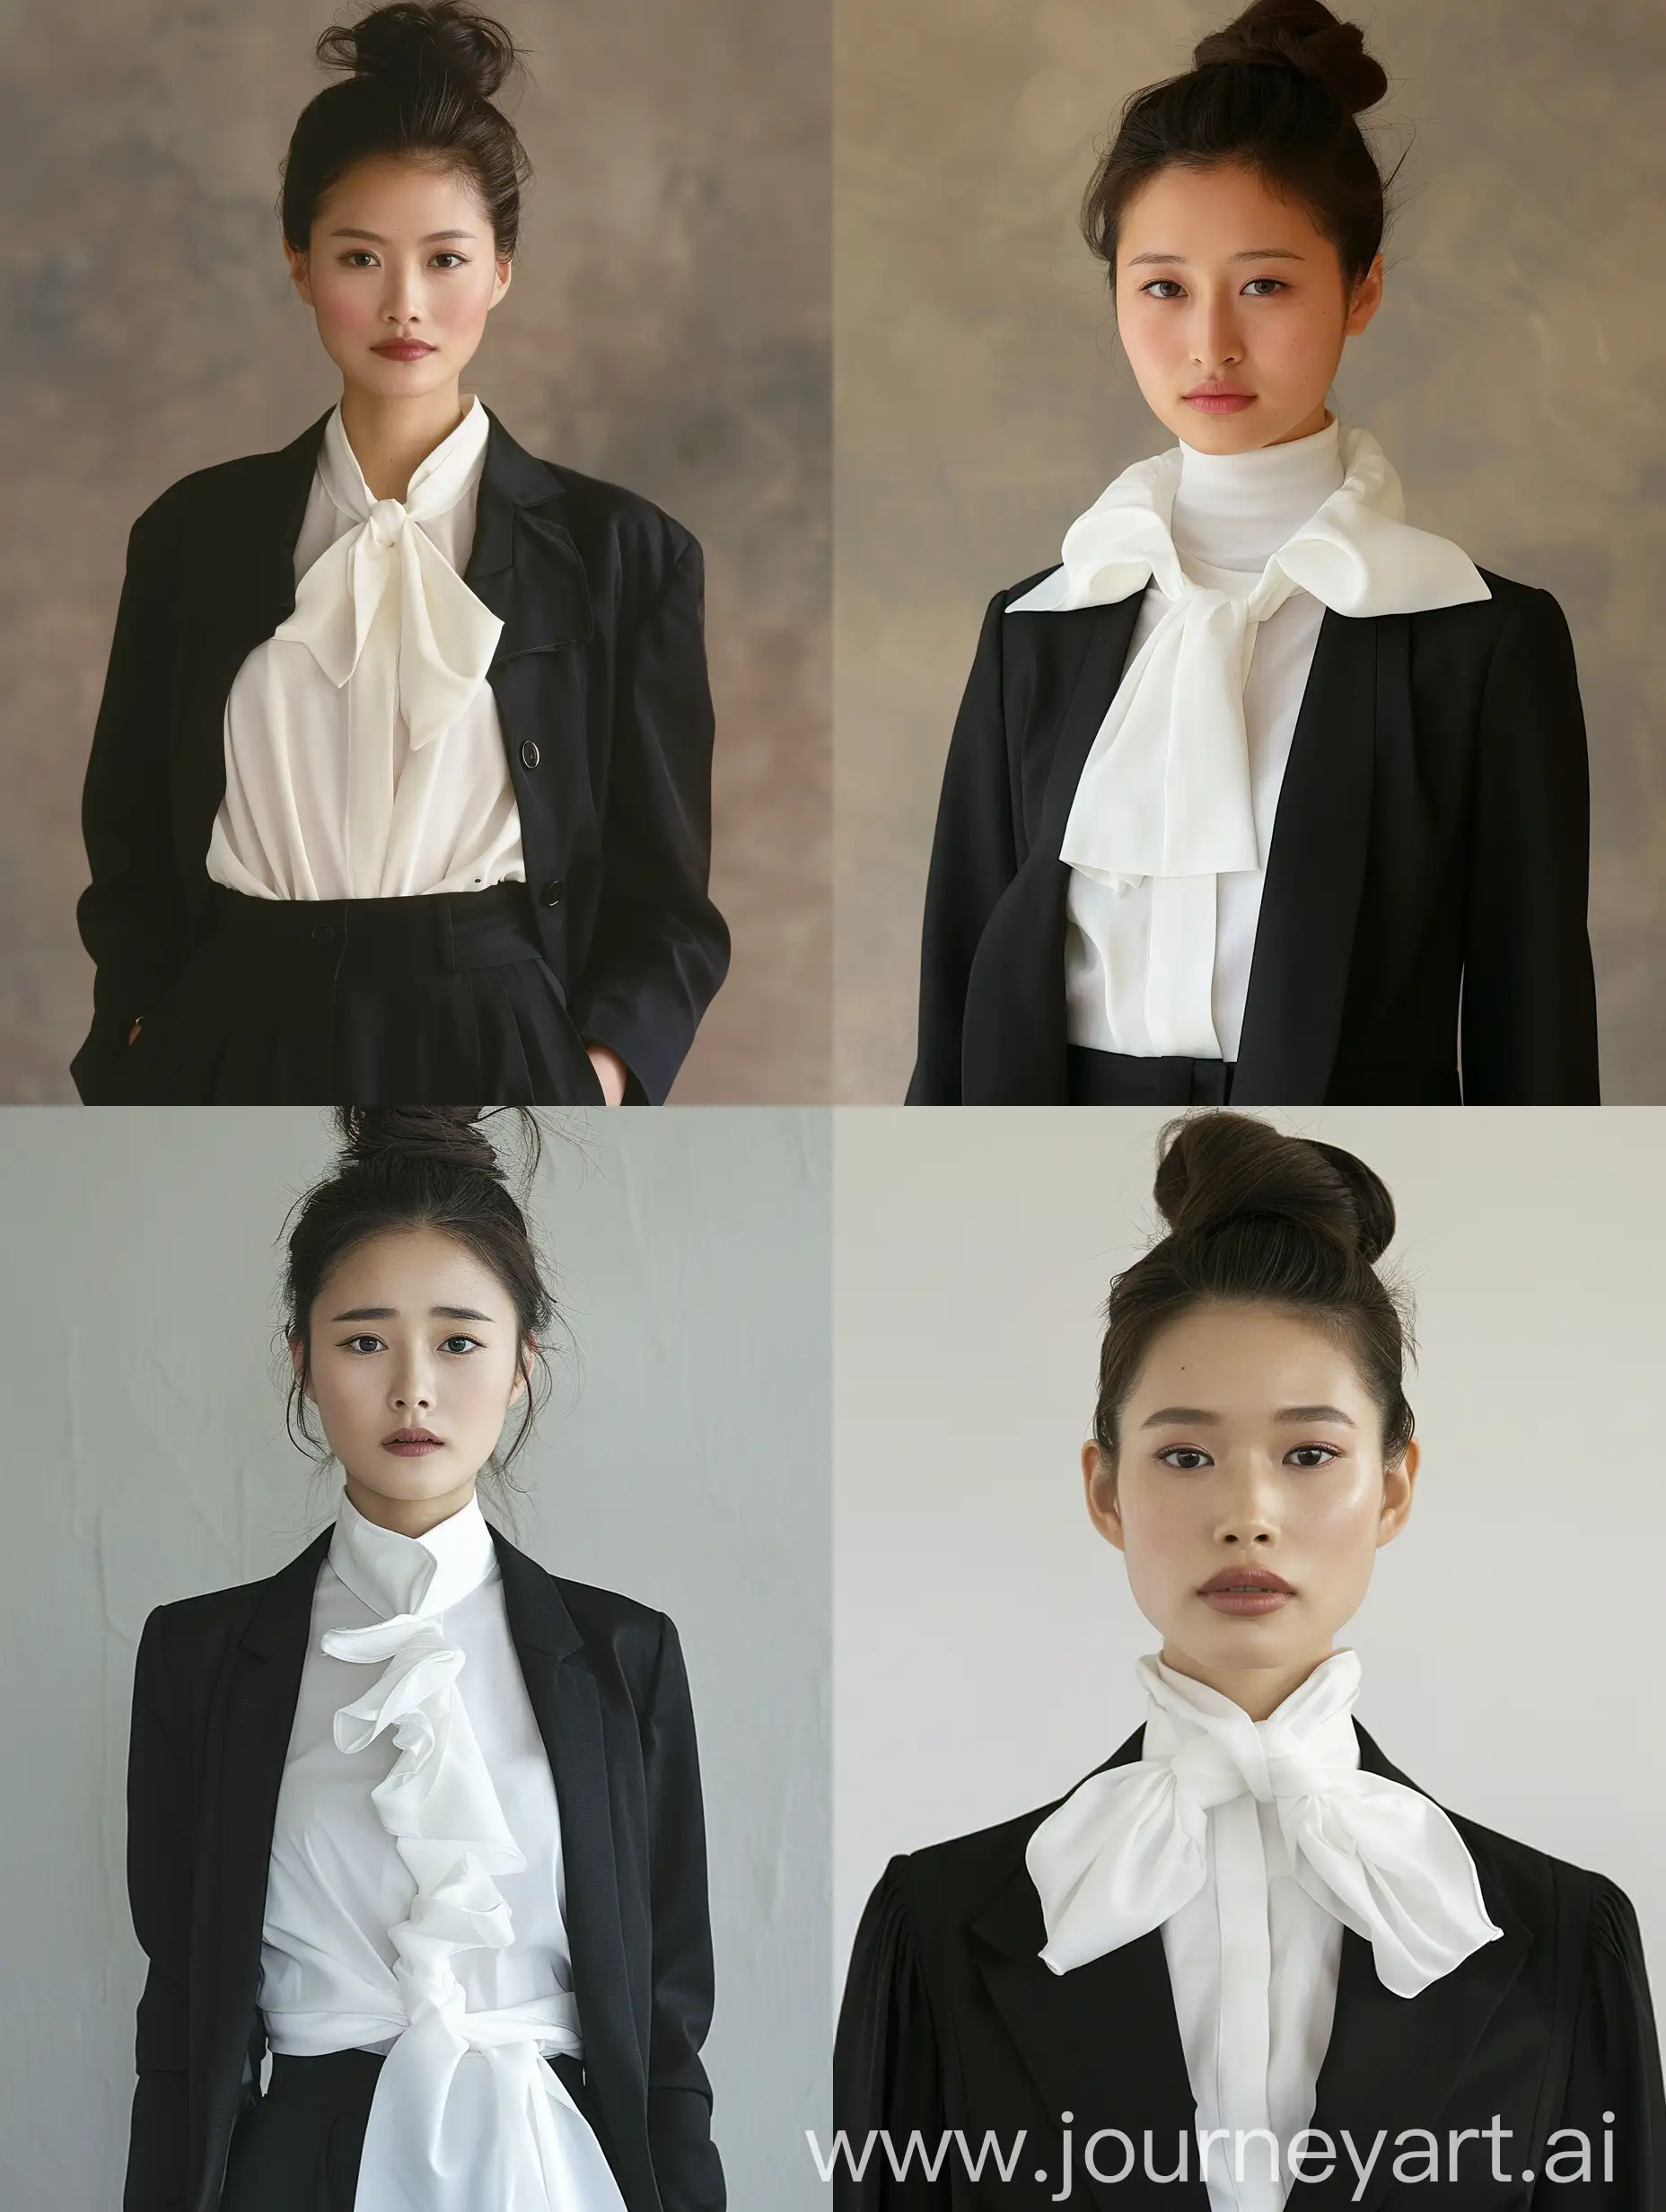 Woman, 30 Years Old, Asian, Chinese, Feminine, Slim Body, Dark Hair, Tied in a Bun, Makeup, Formal Dress Code, Formal Black Pant Suit, Formal White Blouse, Neckline, Collarbone, Large Folded Collar, 2000’s Fashion, 2005, Retro, Office, Work Atmosphere, Photography, Realism